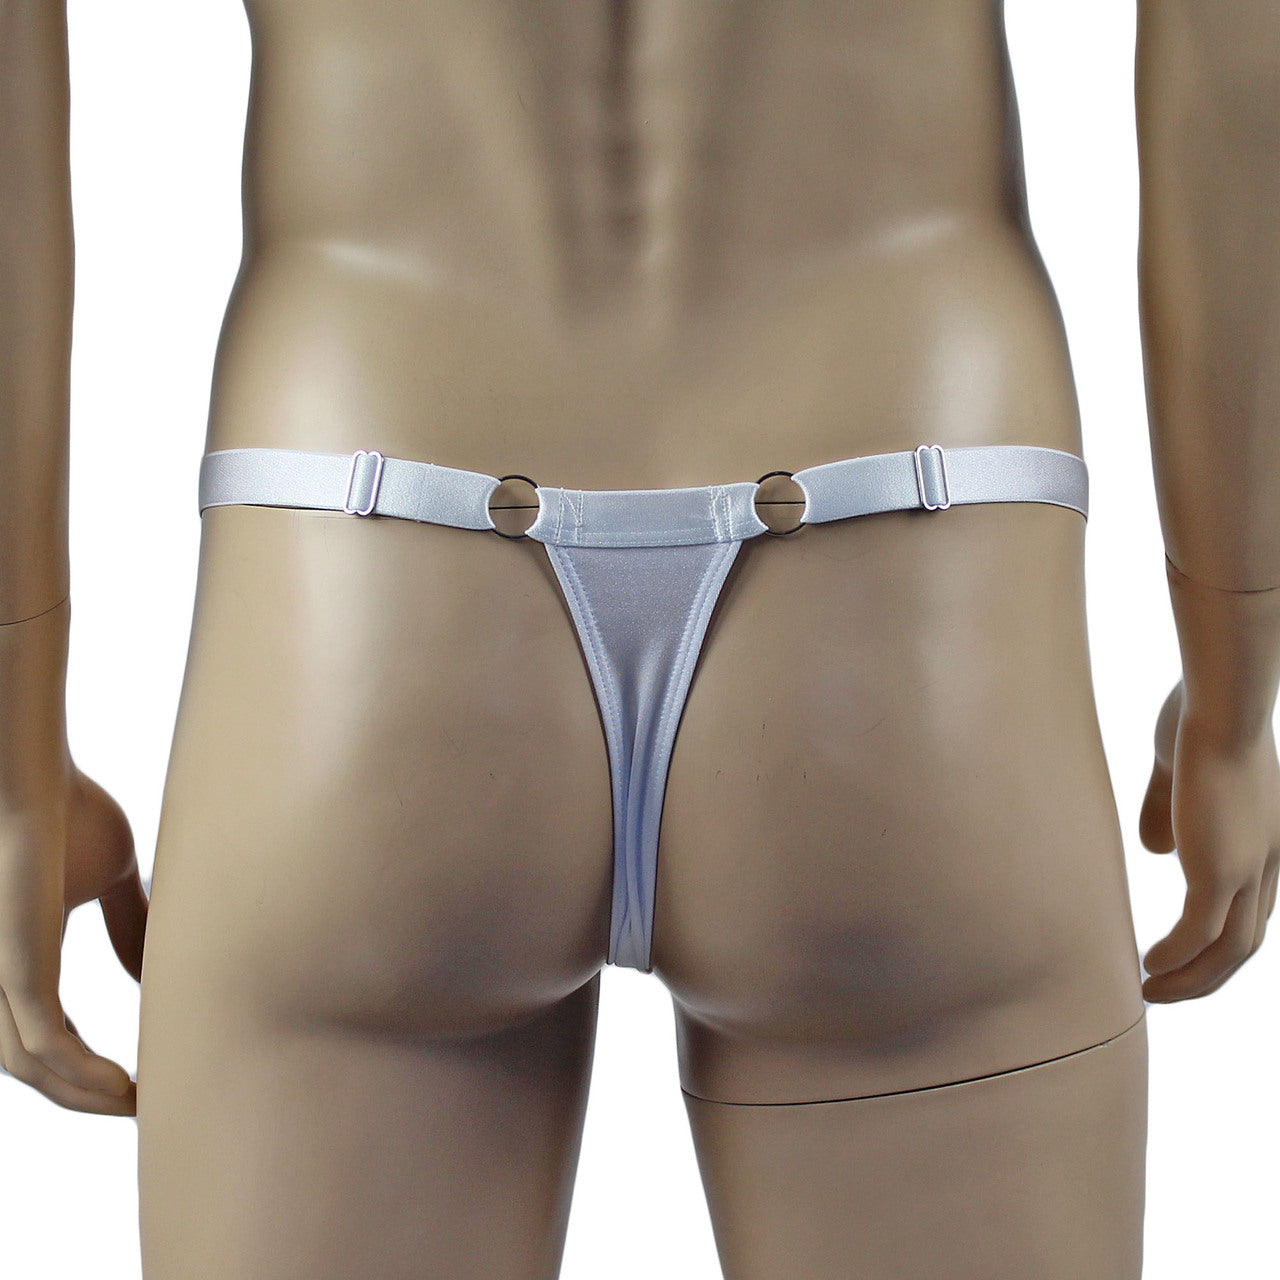 Male Spandex Thong with Ring Sides and Adjustable Strap White